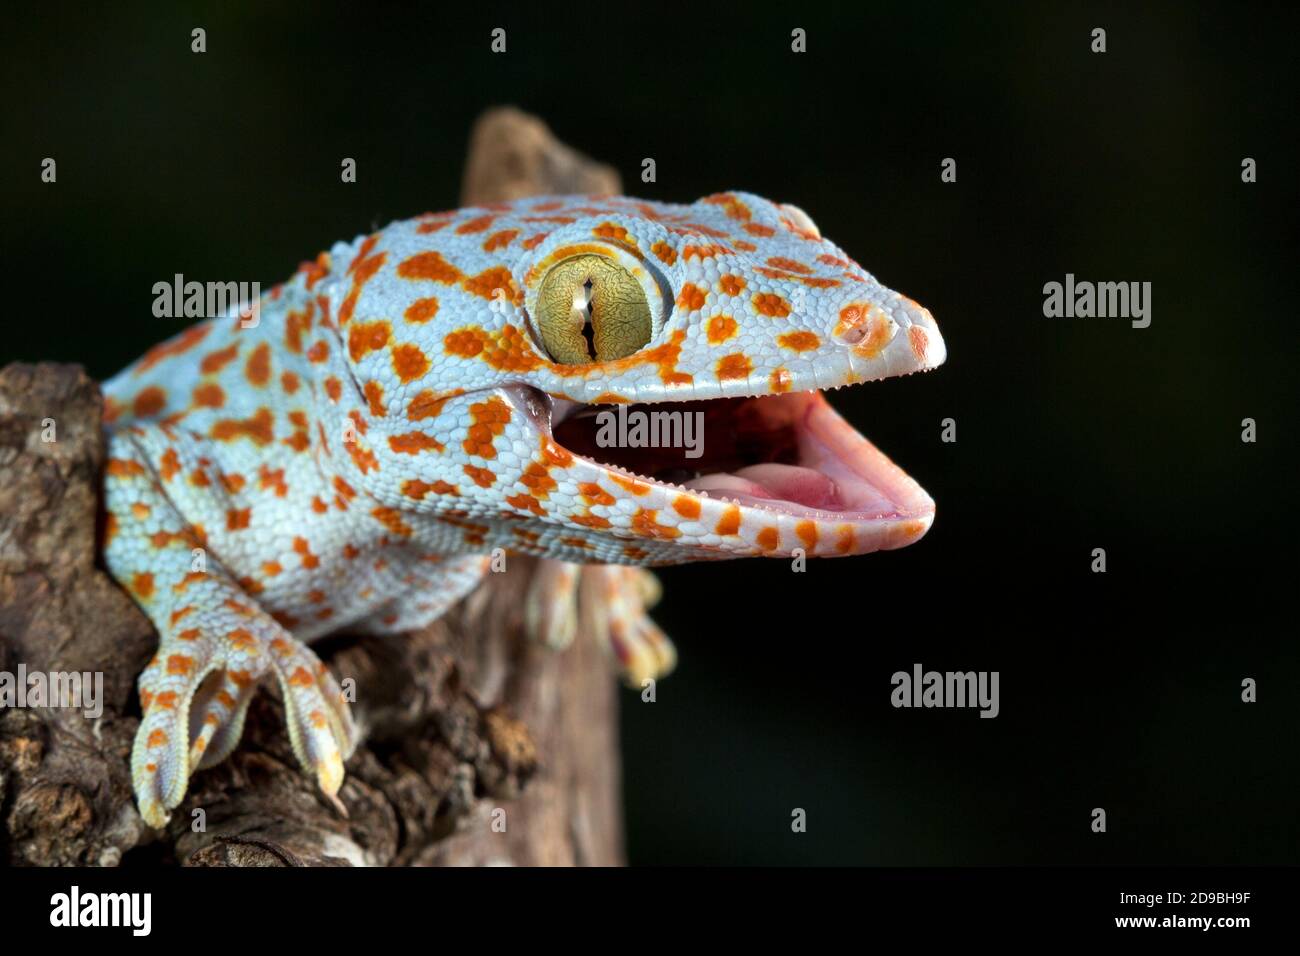 Close-up of a Tokek on a branch, Indonesia Stock Photo